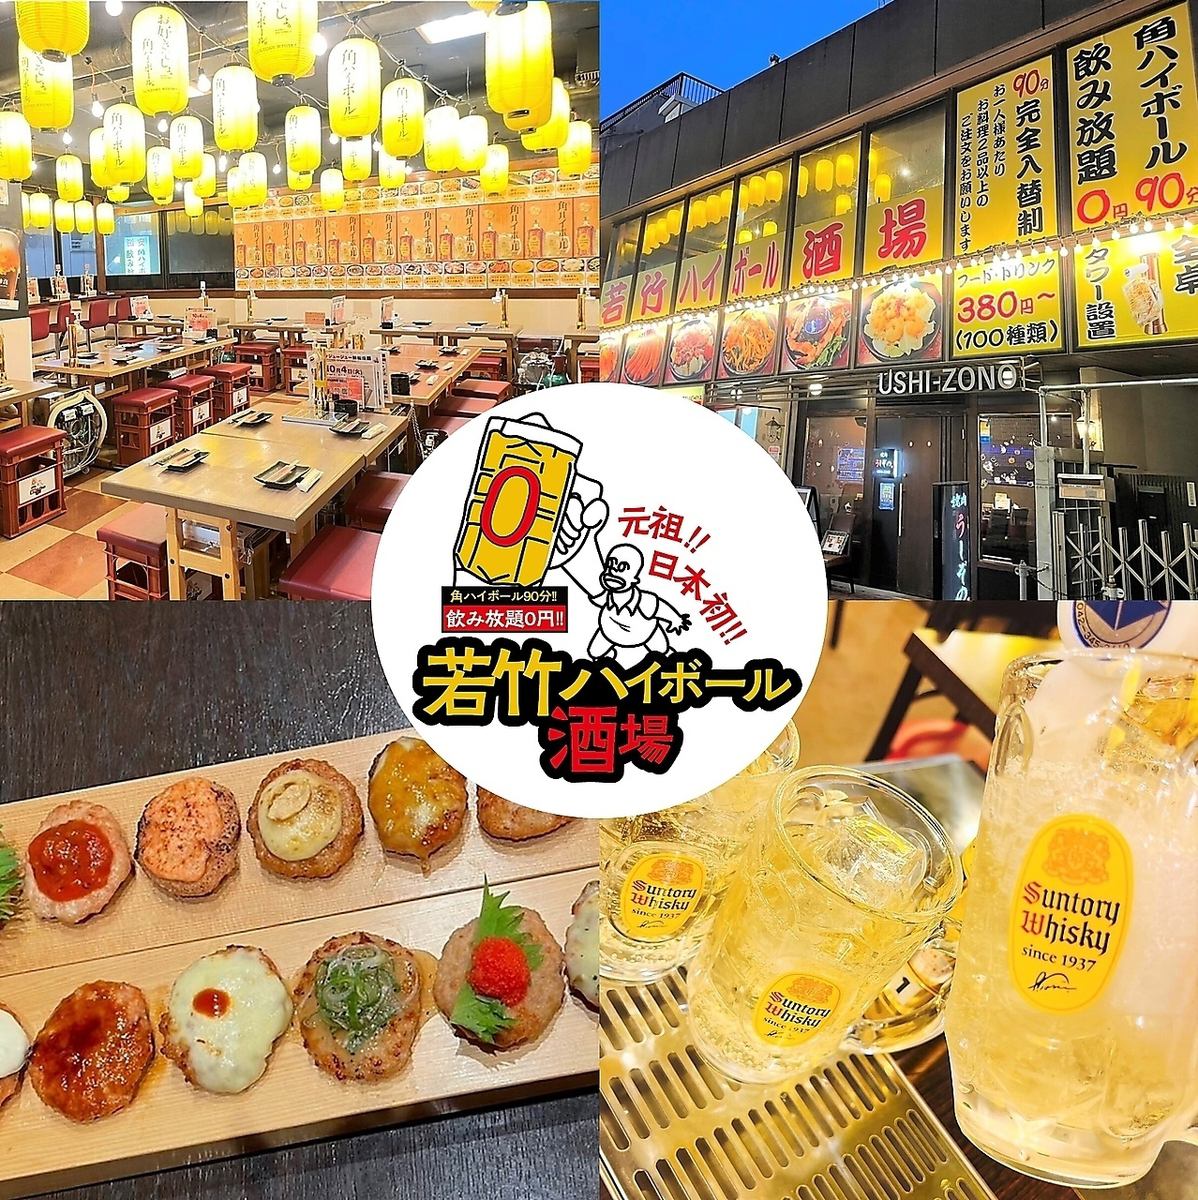 The first in Japan! 90 minutes of Kaku Highball! All-you-can-drink for 0 yen! Grand opening in Tsurumi!